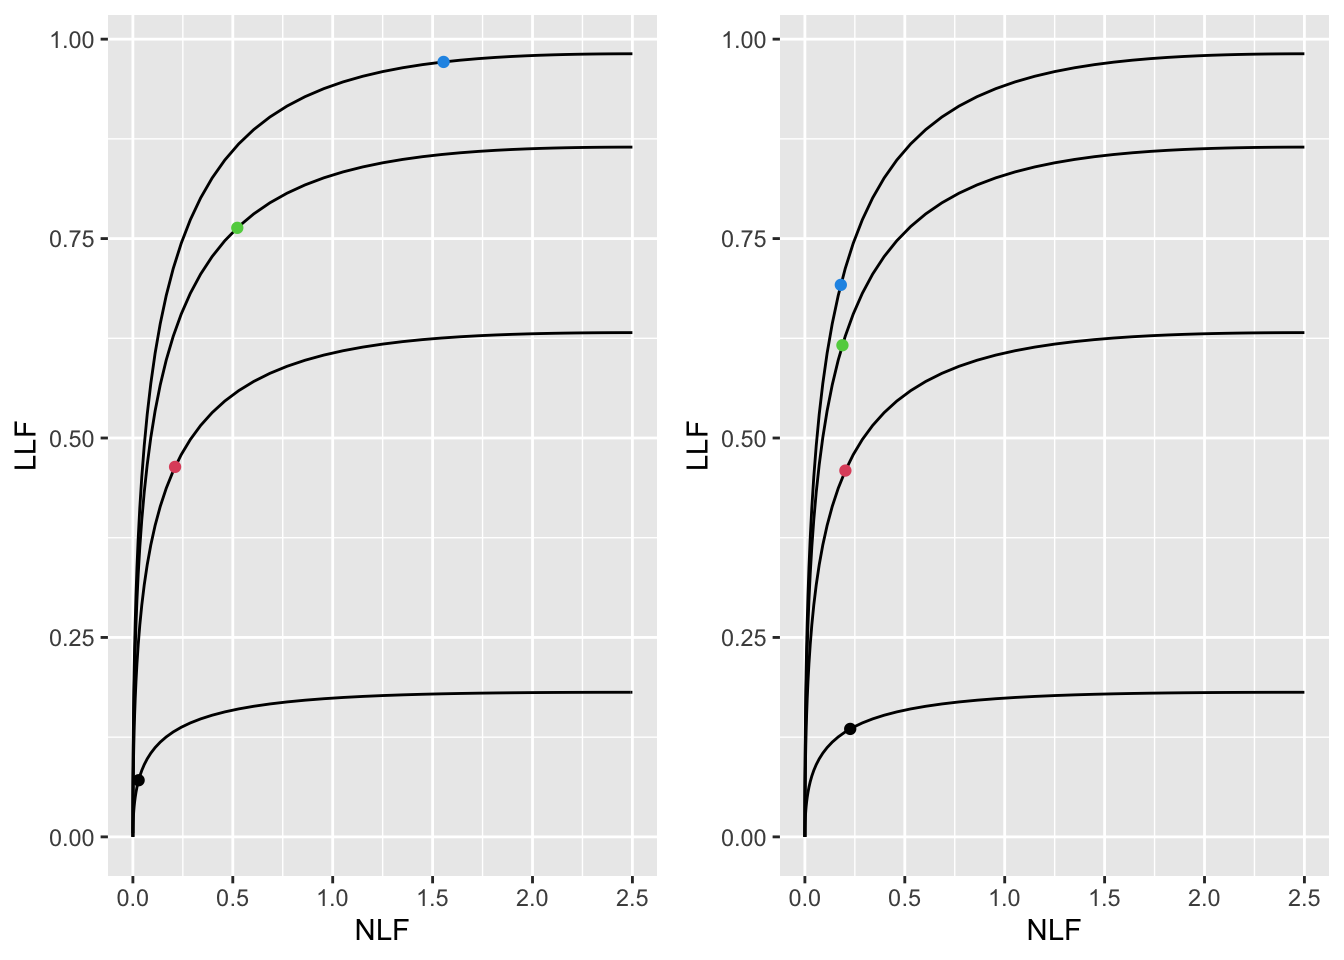 Left panel: maximized wAFROC-AUC was used to find optimal $\zeta_1$. Right panel: maximized Youden-index was used to find optimal $\zeta_1$. Dot colors: black means $\nu = 0.1$, red means $\nu = 0.5$, green means $\nu = 1$ and blue means $\nu = 2$.